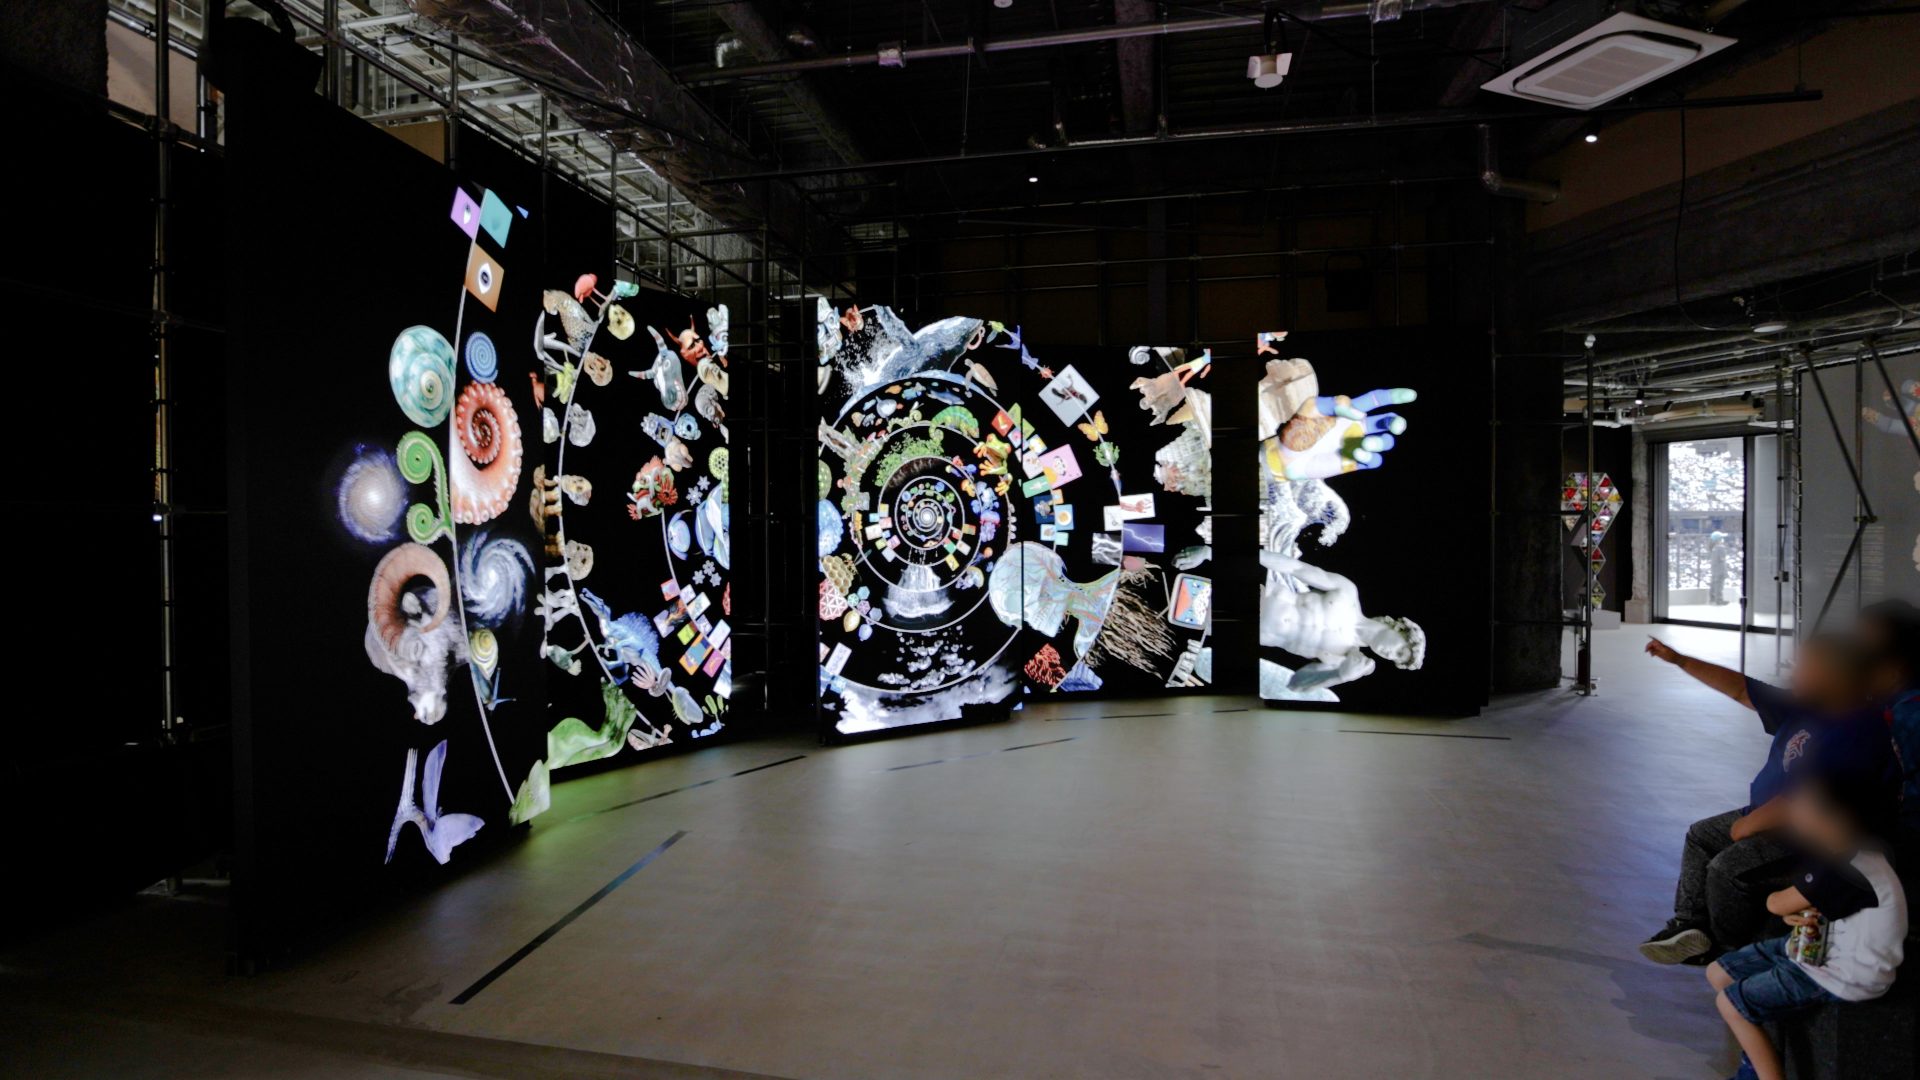 Dynamic images made up of five 3.4m high LED vision systems inside the museum